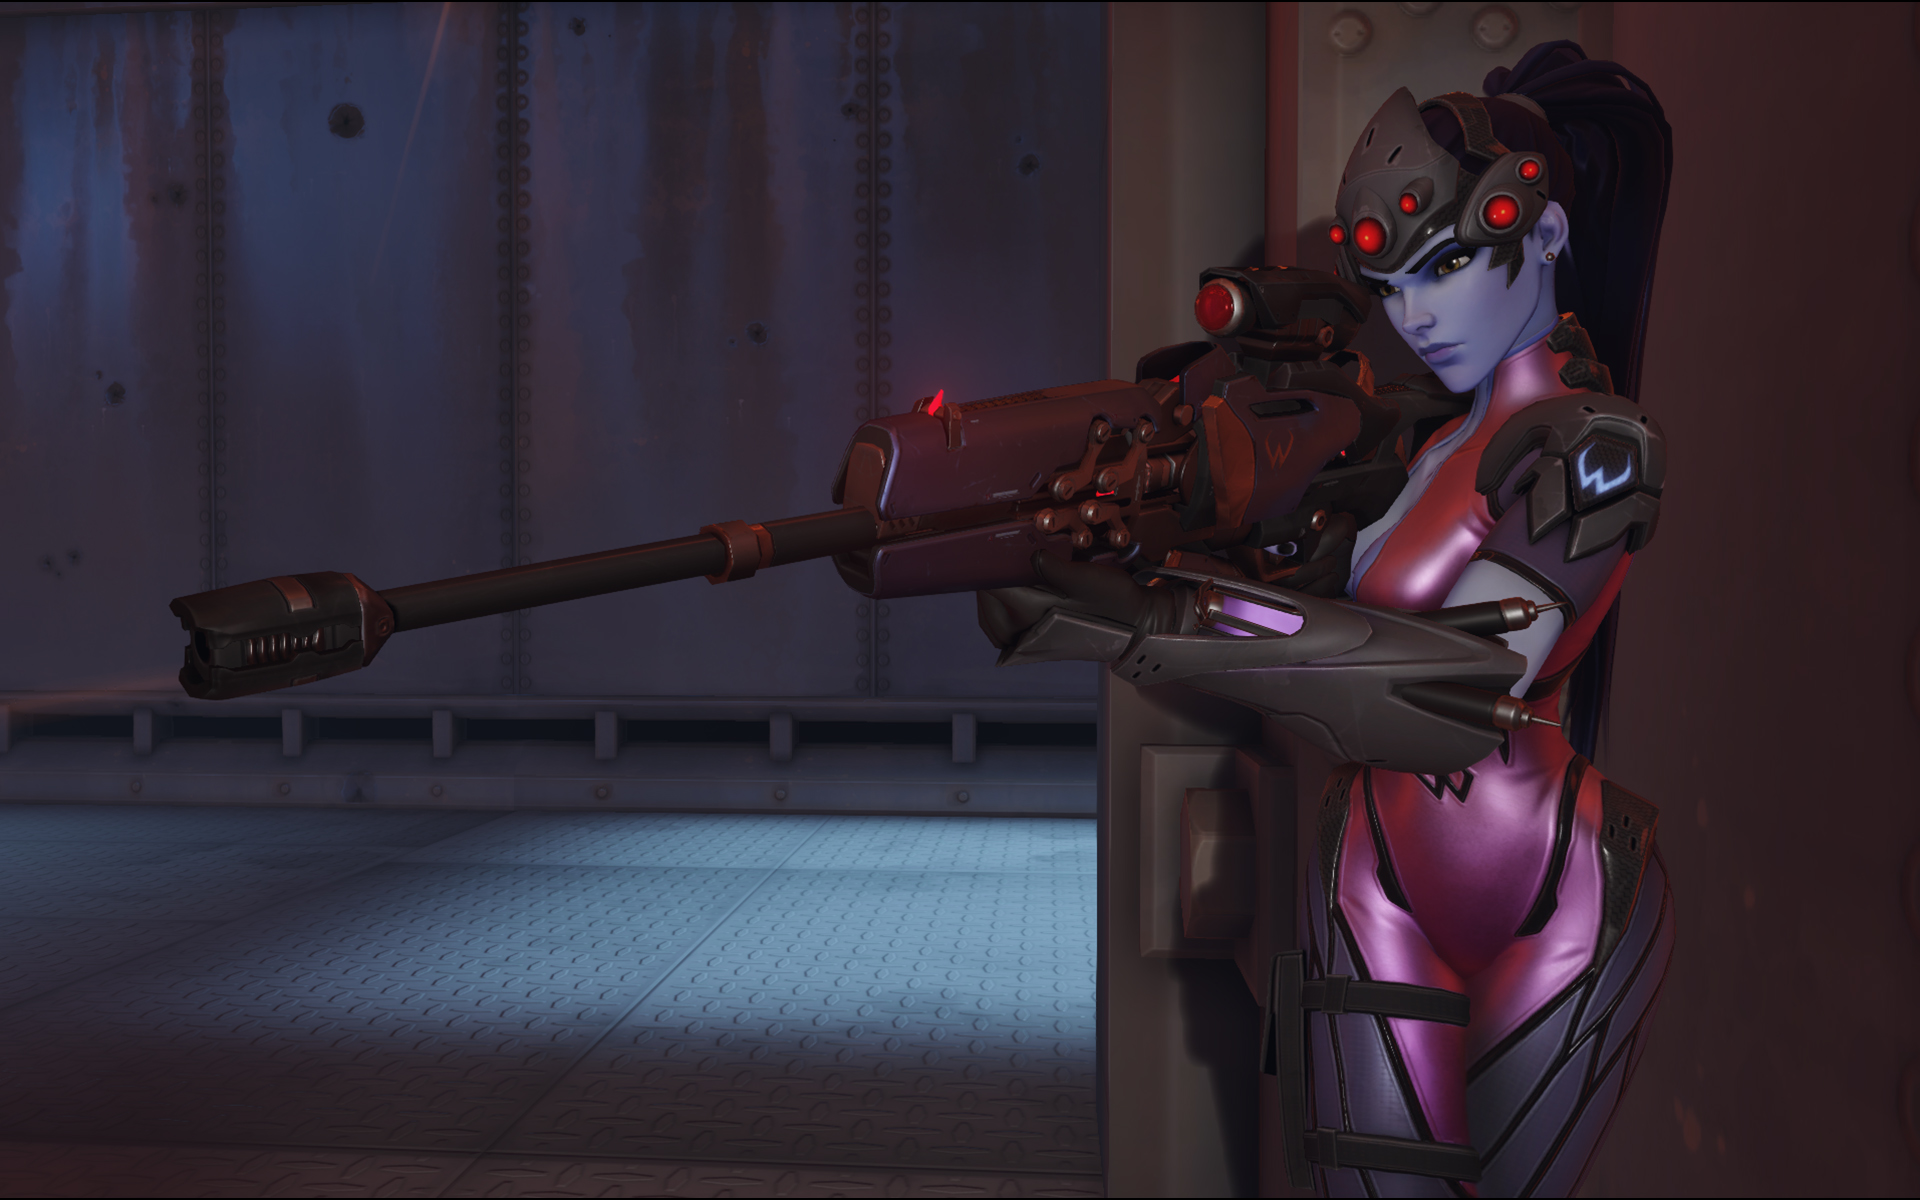 REVEALED: New Cinematic for “Overwatch” - Features Widowmaker